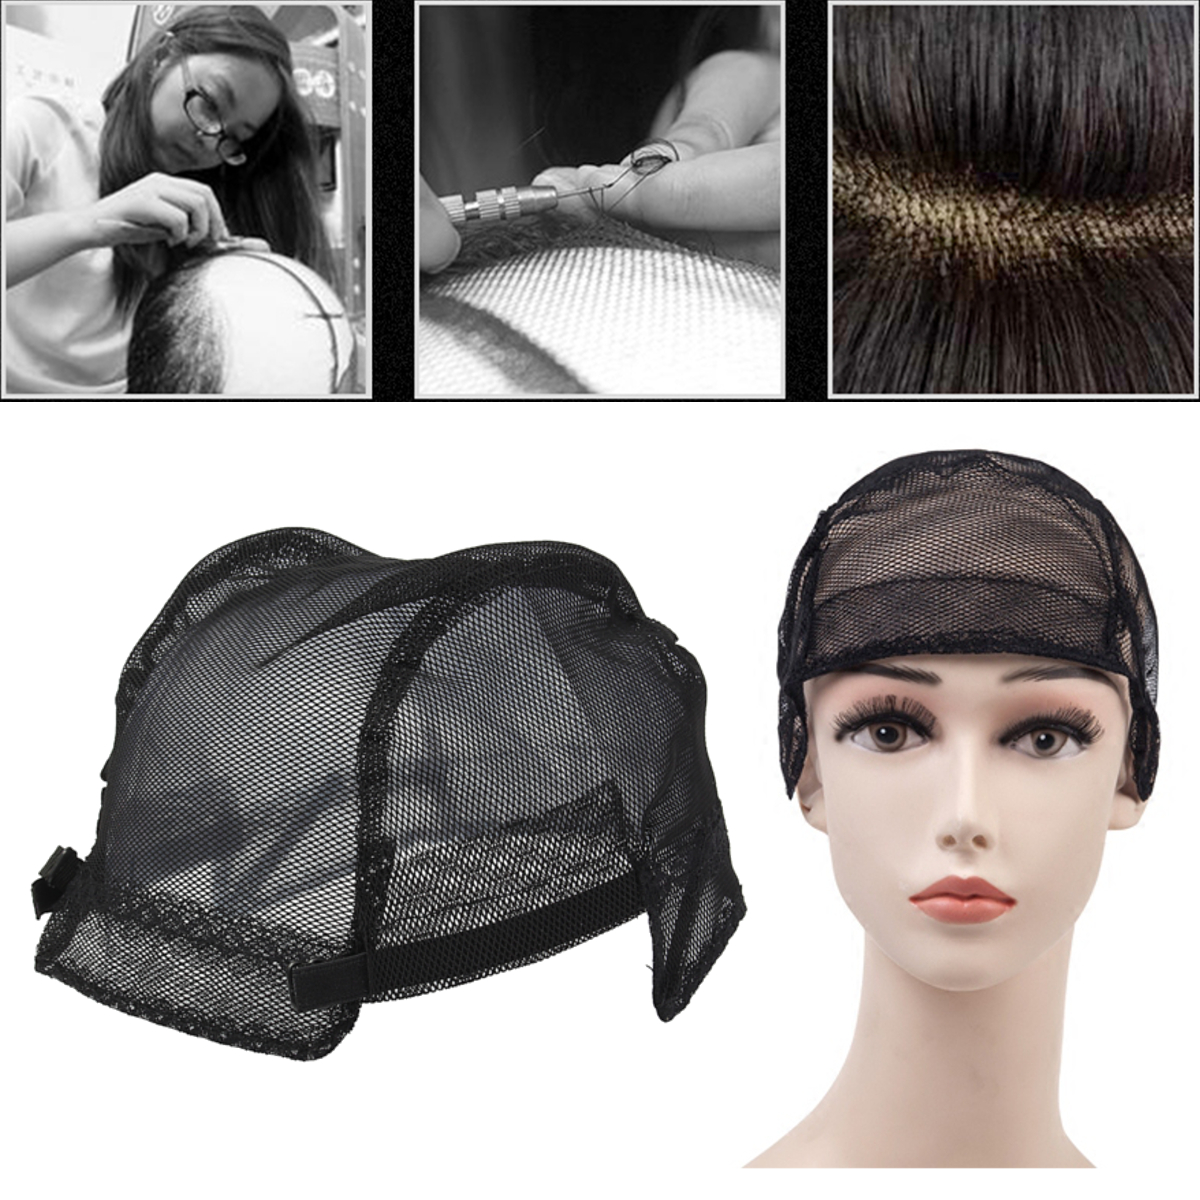 Wig Caps For Making Wigs Stretch Lace Weaving Cap Adjustable Straps Bl ...